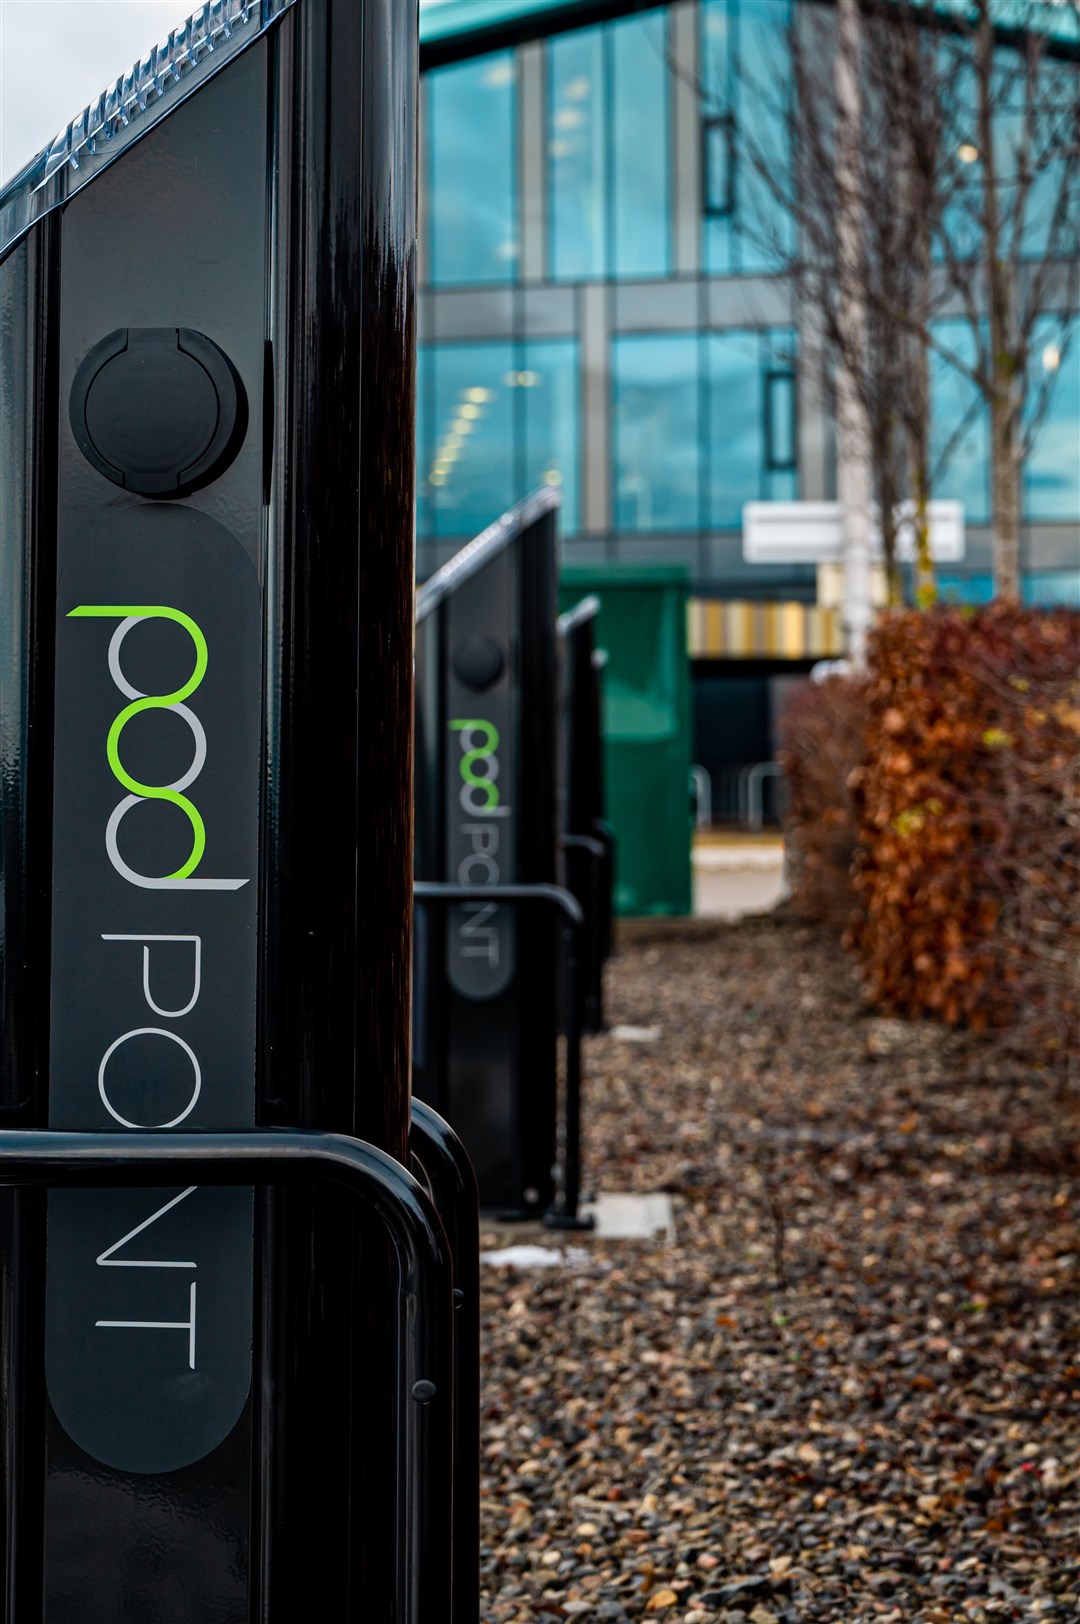 The new charging points at Inverness Campus will soon be able to charge up to 12 vehicles at once.